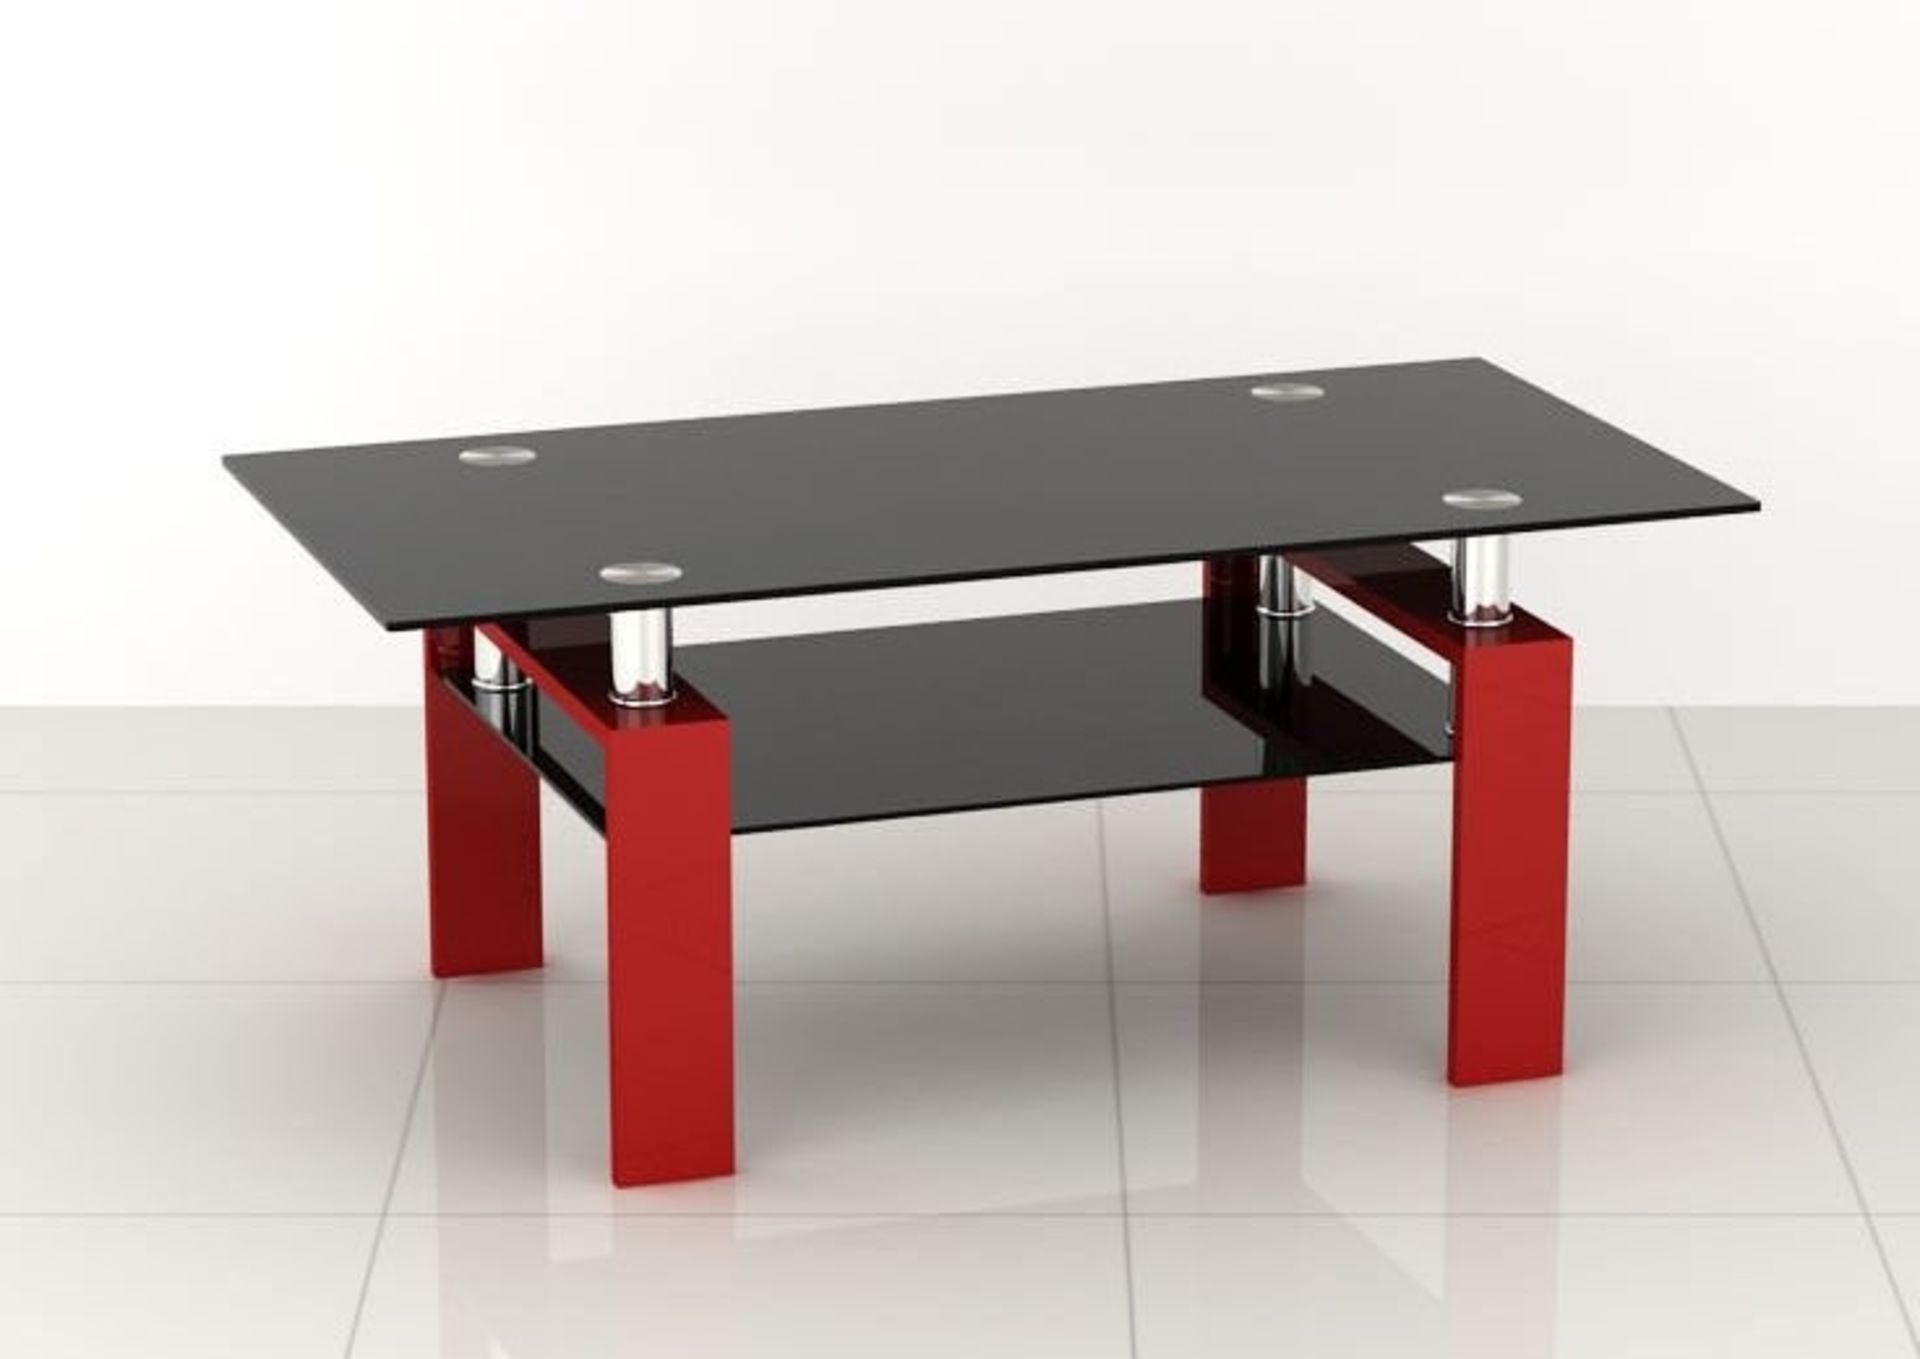 1 x Black Glass/Red Coffee Table - Product Code CTB419RED (Brand New & Boxed)